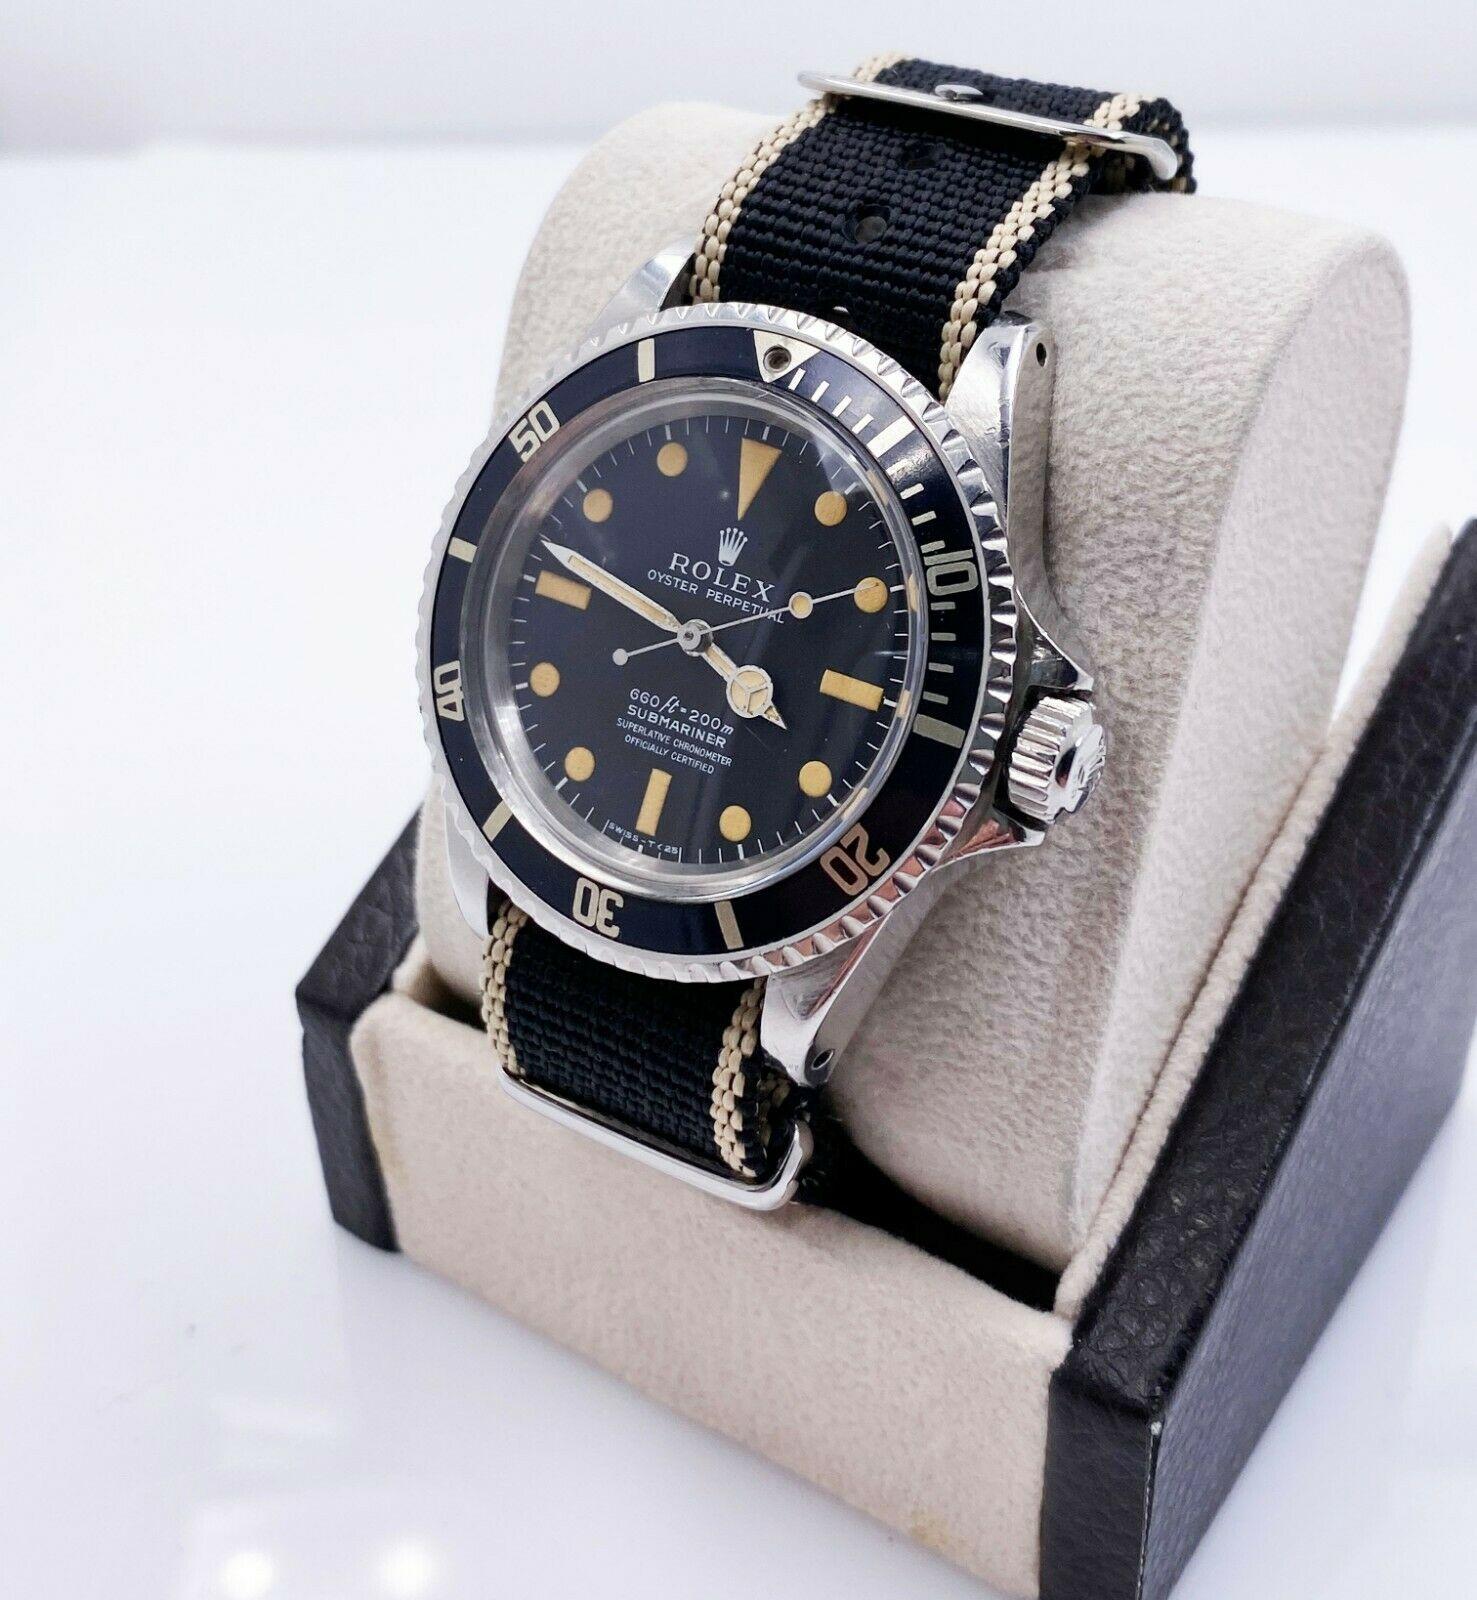 Style Number: 5512

 

Serial: 3443***


Year: 1973

 

Model: Submariner 

 

Case Material: Stainless Steel

 

Band: Custom Nato Strap 

 

Bezel:  Black 

 

Dial: Matte Black Pumpkin Dial  4 Line 

 

Face: Acrylic 

 

Case Size: 40mm

